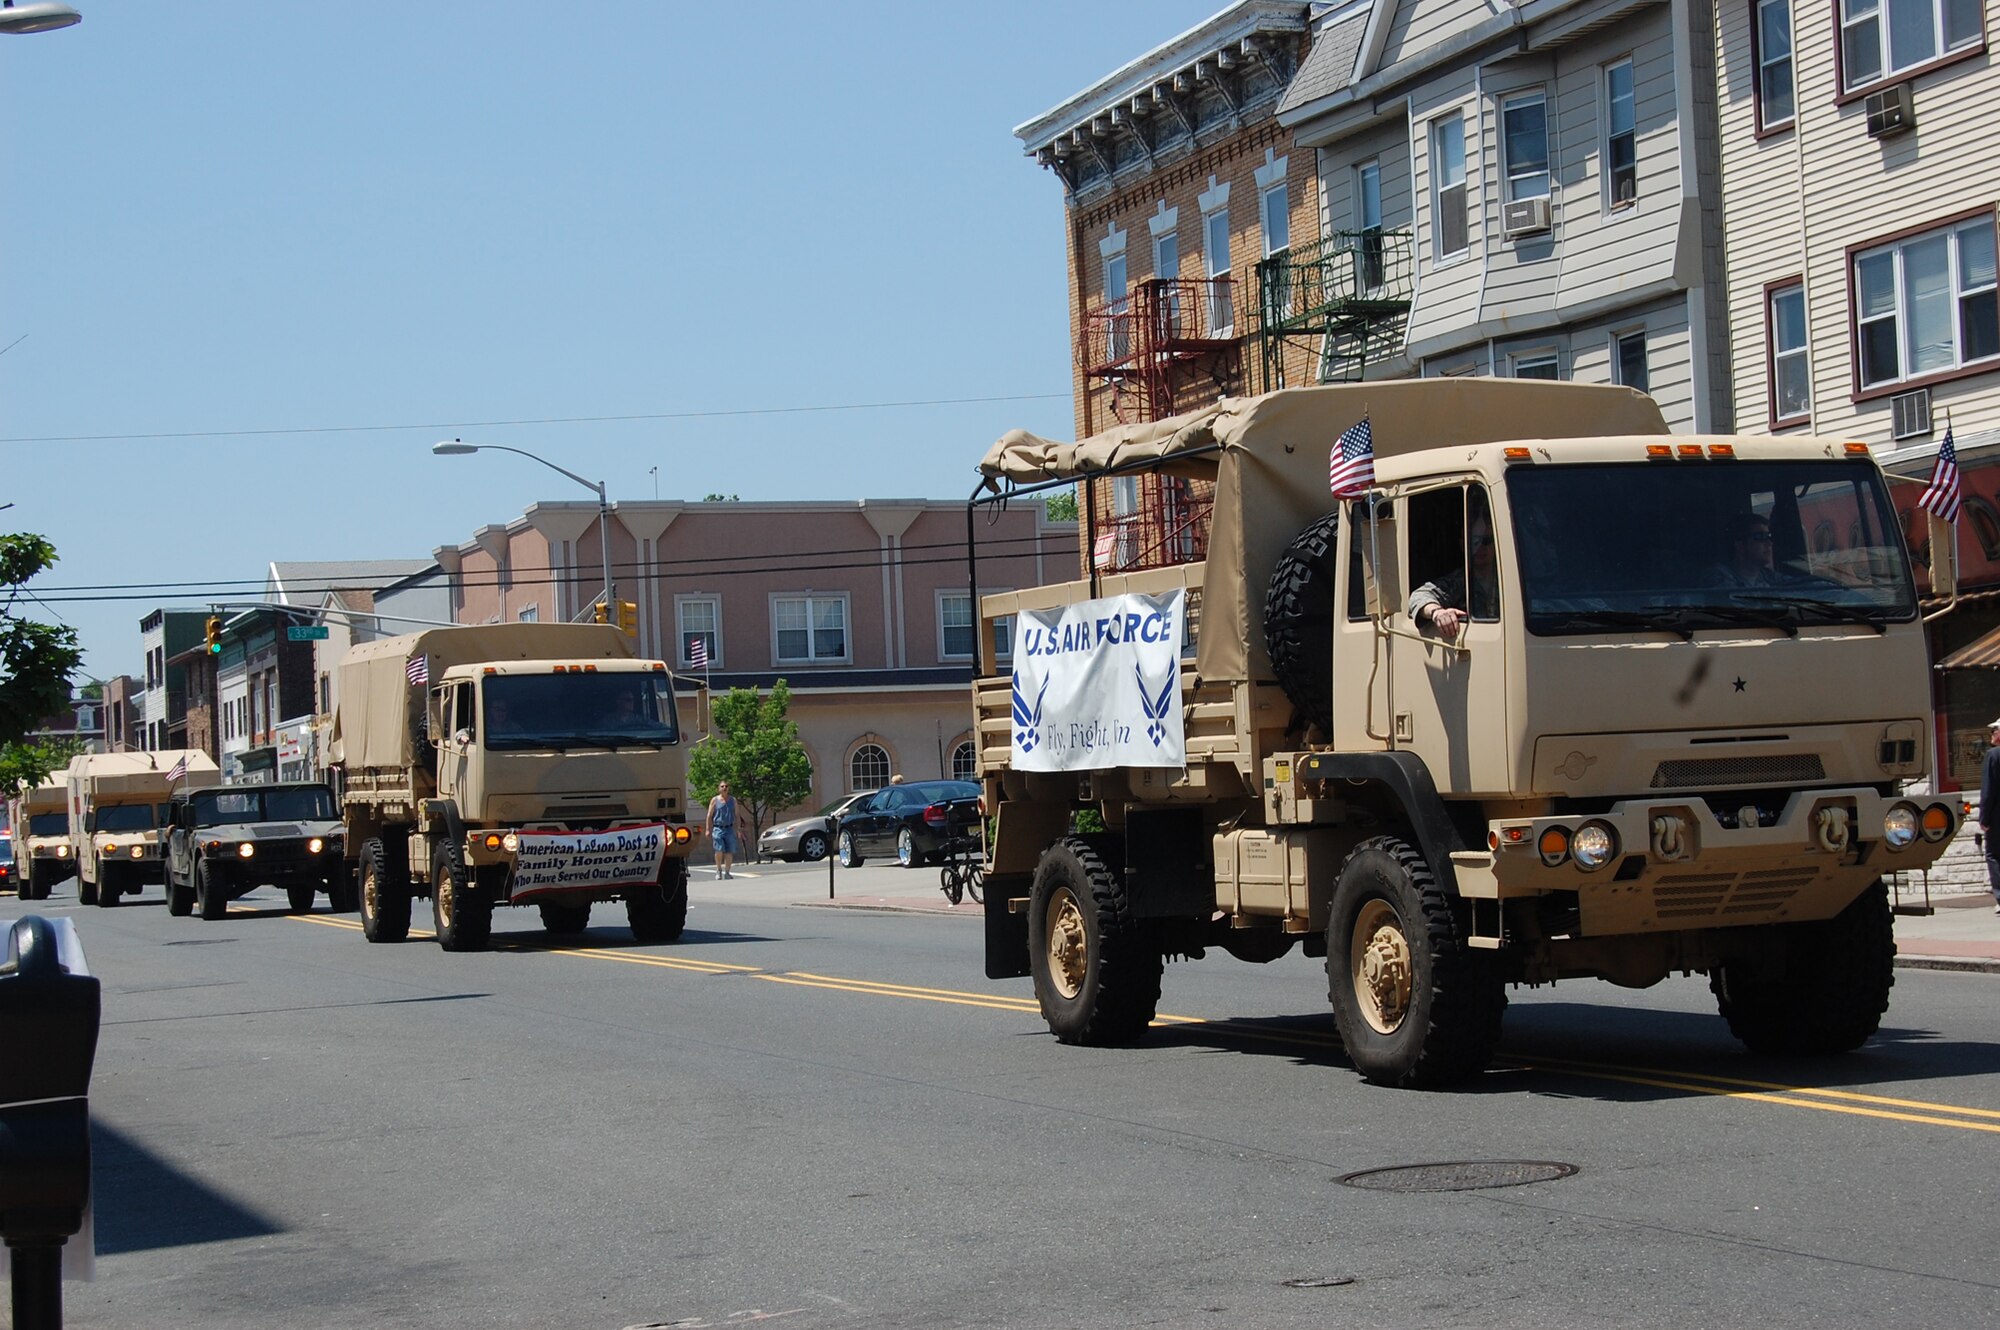 A 421st Combat Training Squadron tactical support truck leads the way for the 421 Scorpion convoy representing the Air Force and USAF Expeditionary Center in the 92nd Bayonne, N.J., Memorial Day parade May 31.The 421st drove three vehicles to participate in the parade, which was dedicated to service members who served in the Korean War. (Photo by Lt. Col. Laura Lenderman)
